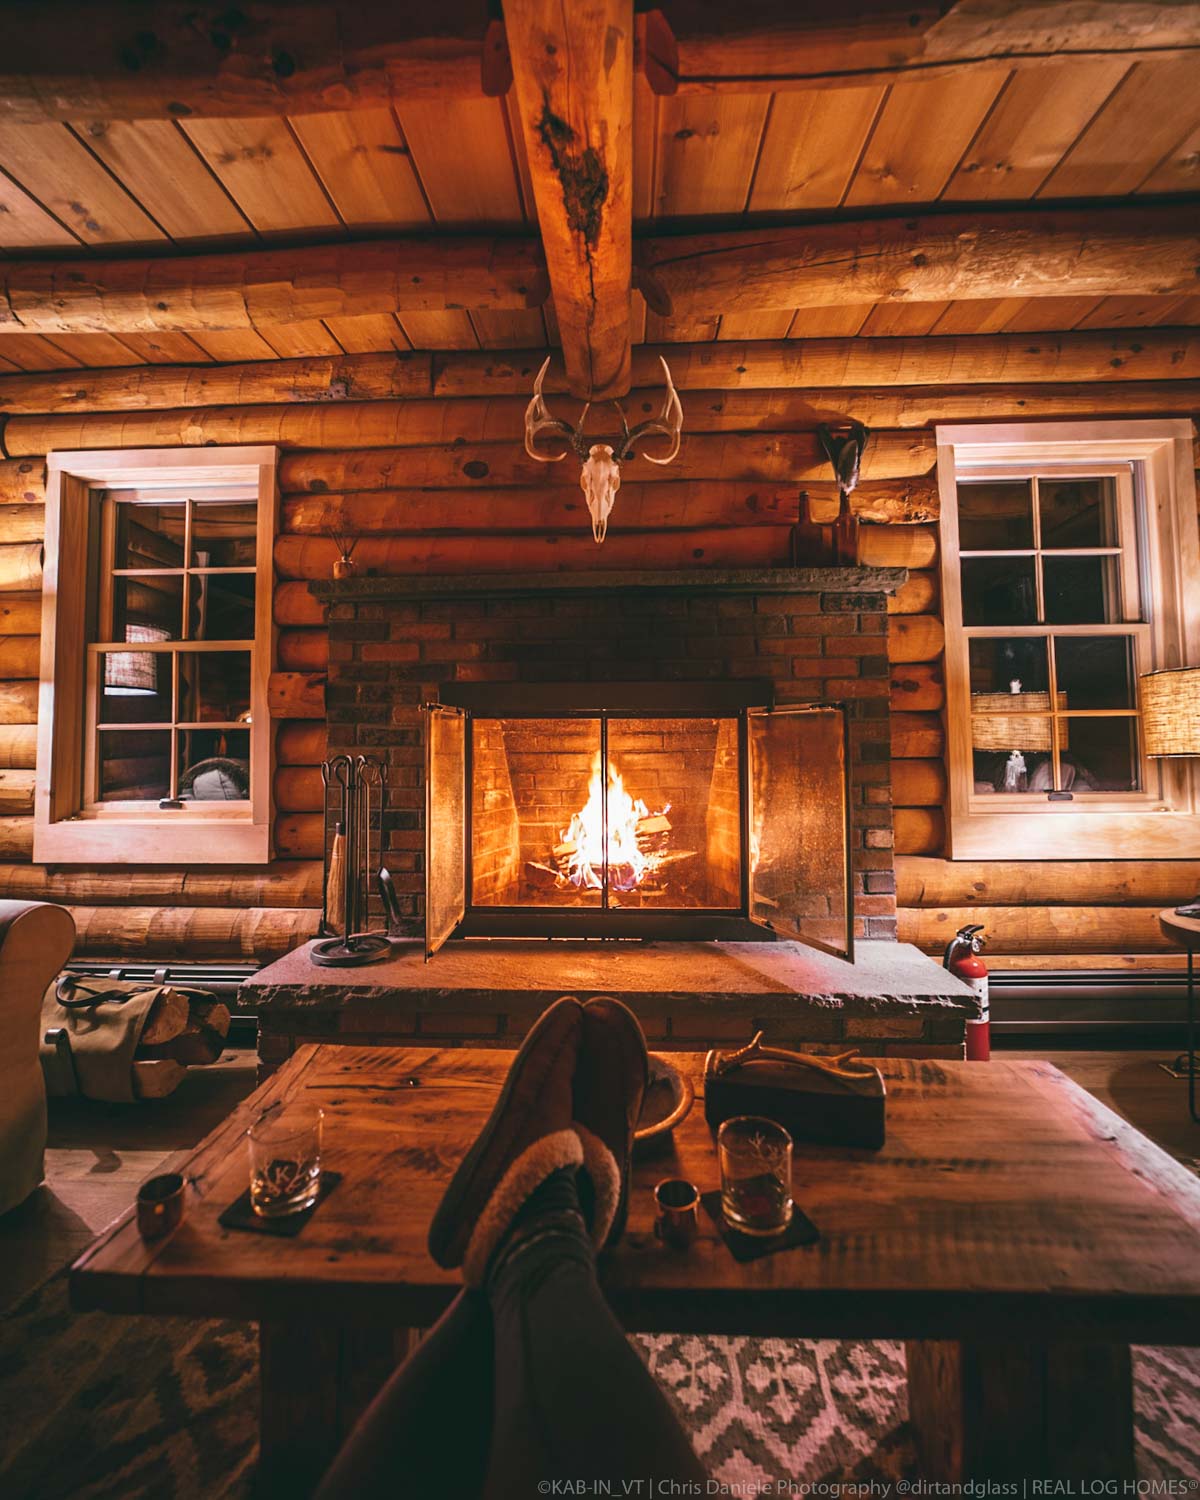 Make The Most of Every Vacation Day in a Log Home